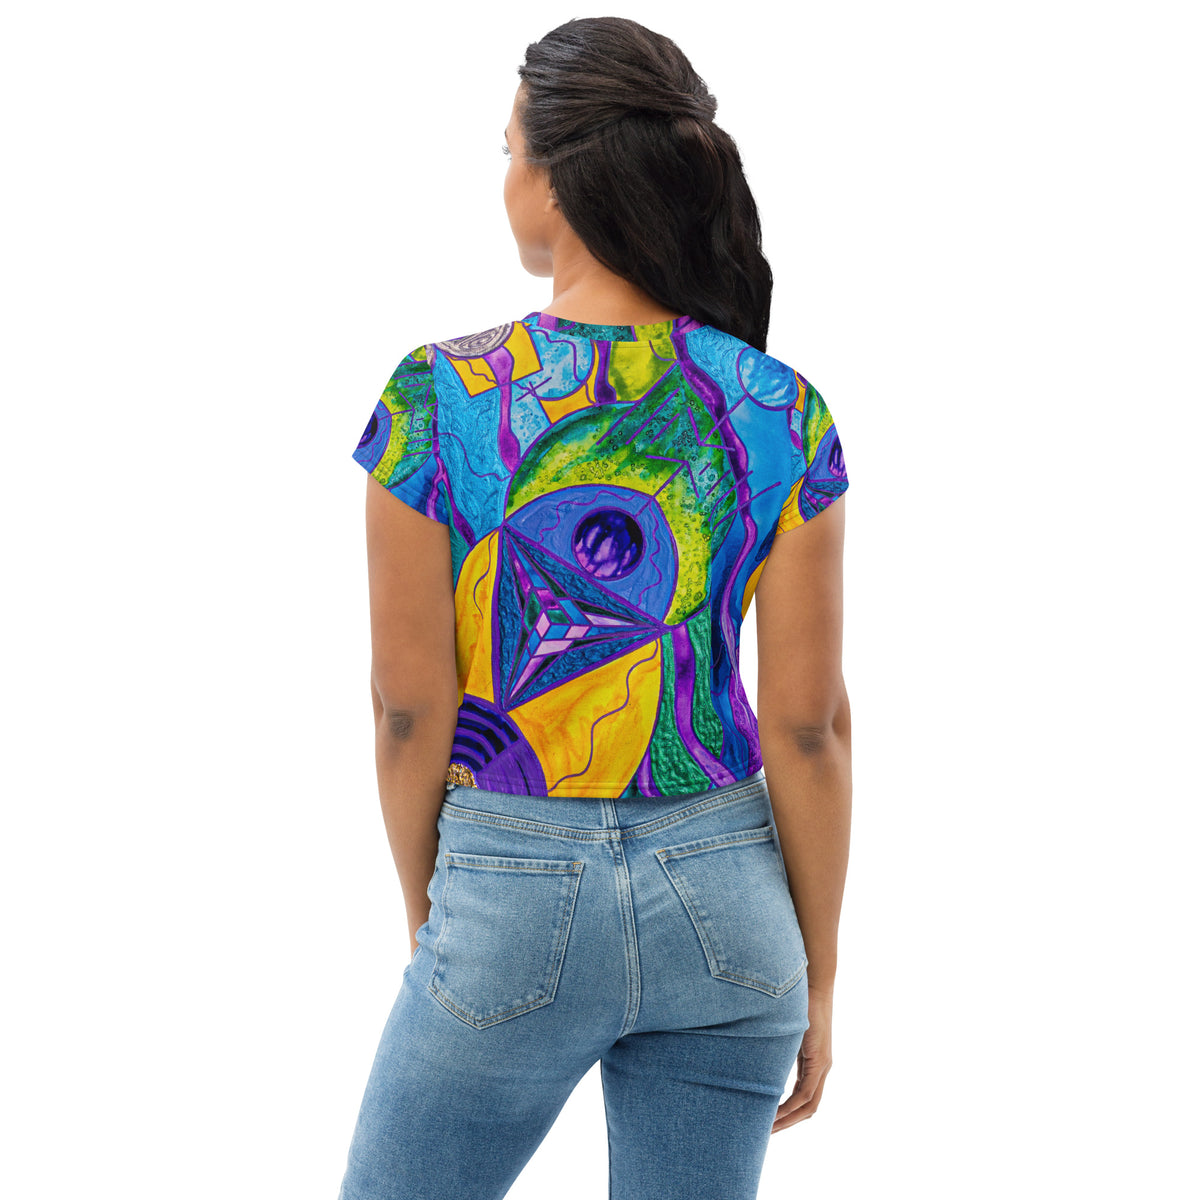 Universal Current - All-Over Print Crop Top Tee